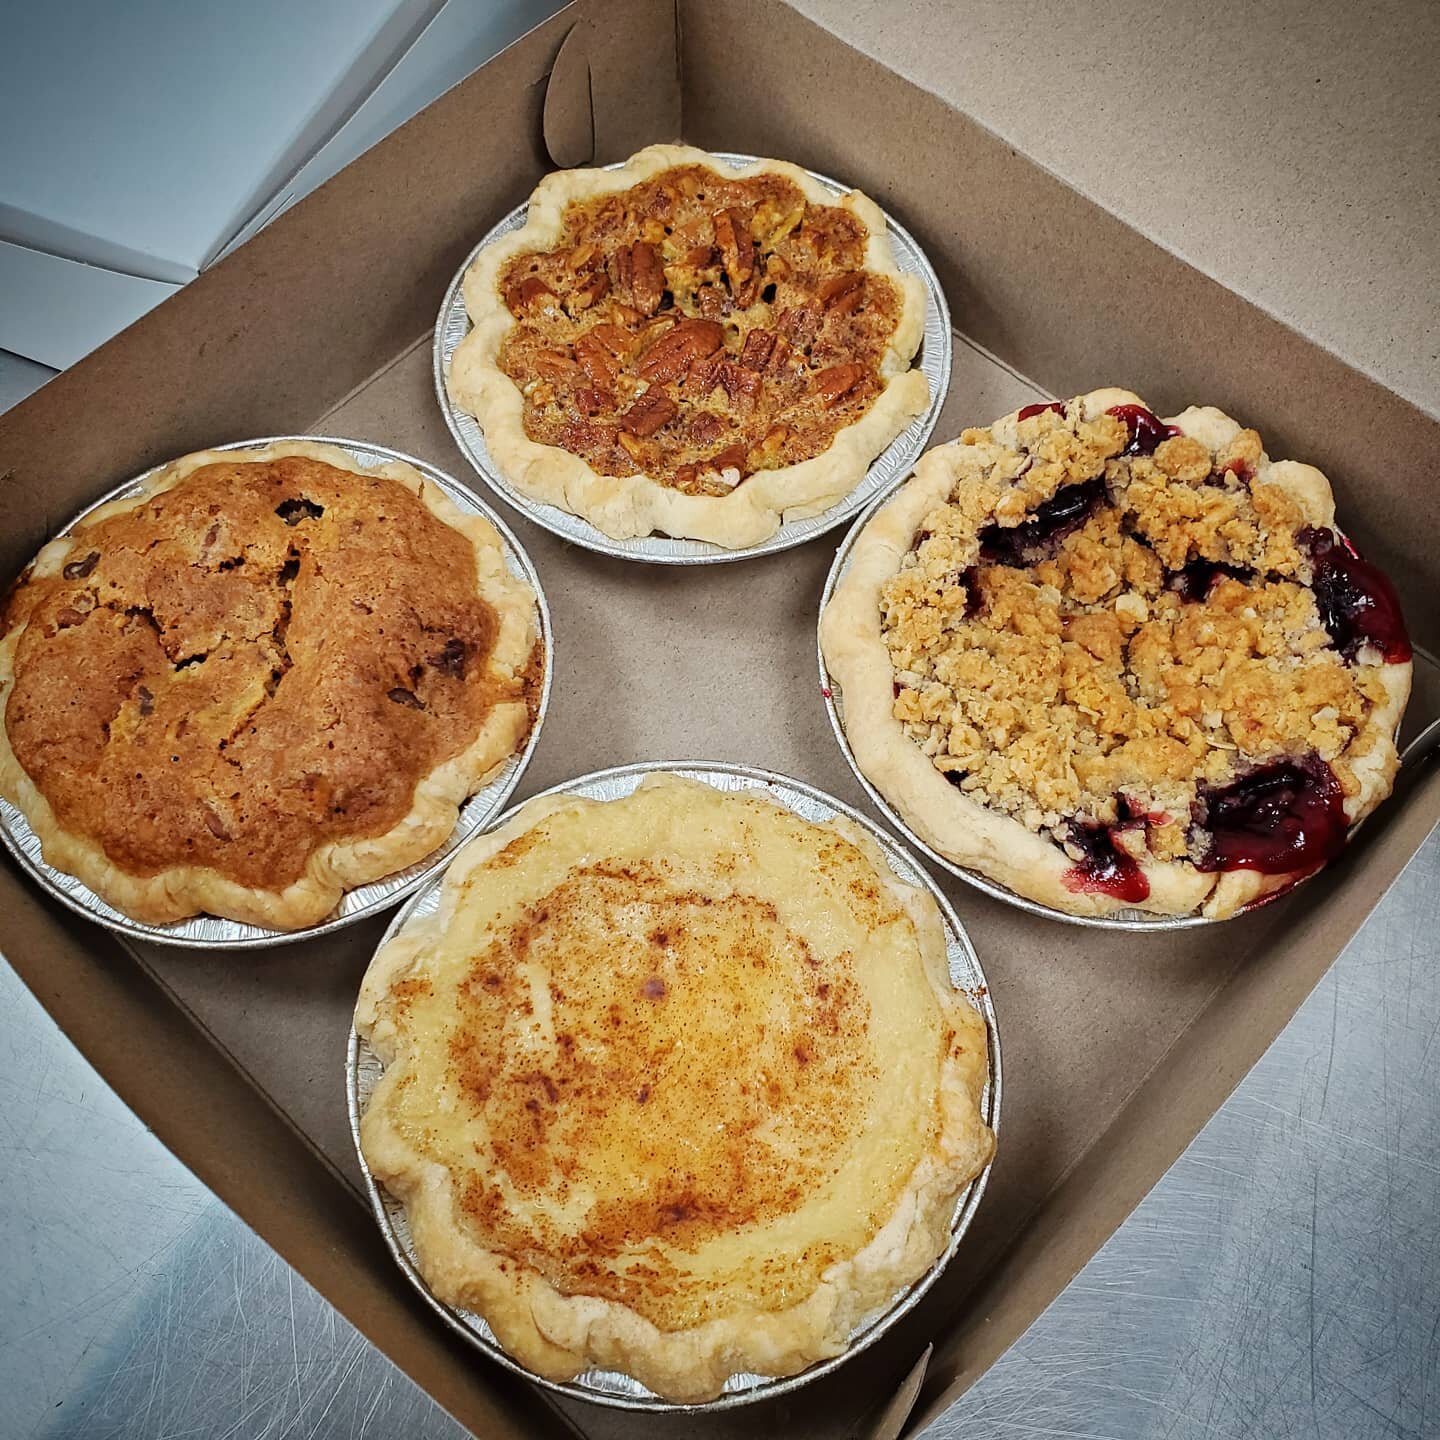 Bakerson's 4-pack of mini pies is a great way to sample all the flavors.